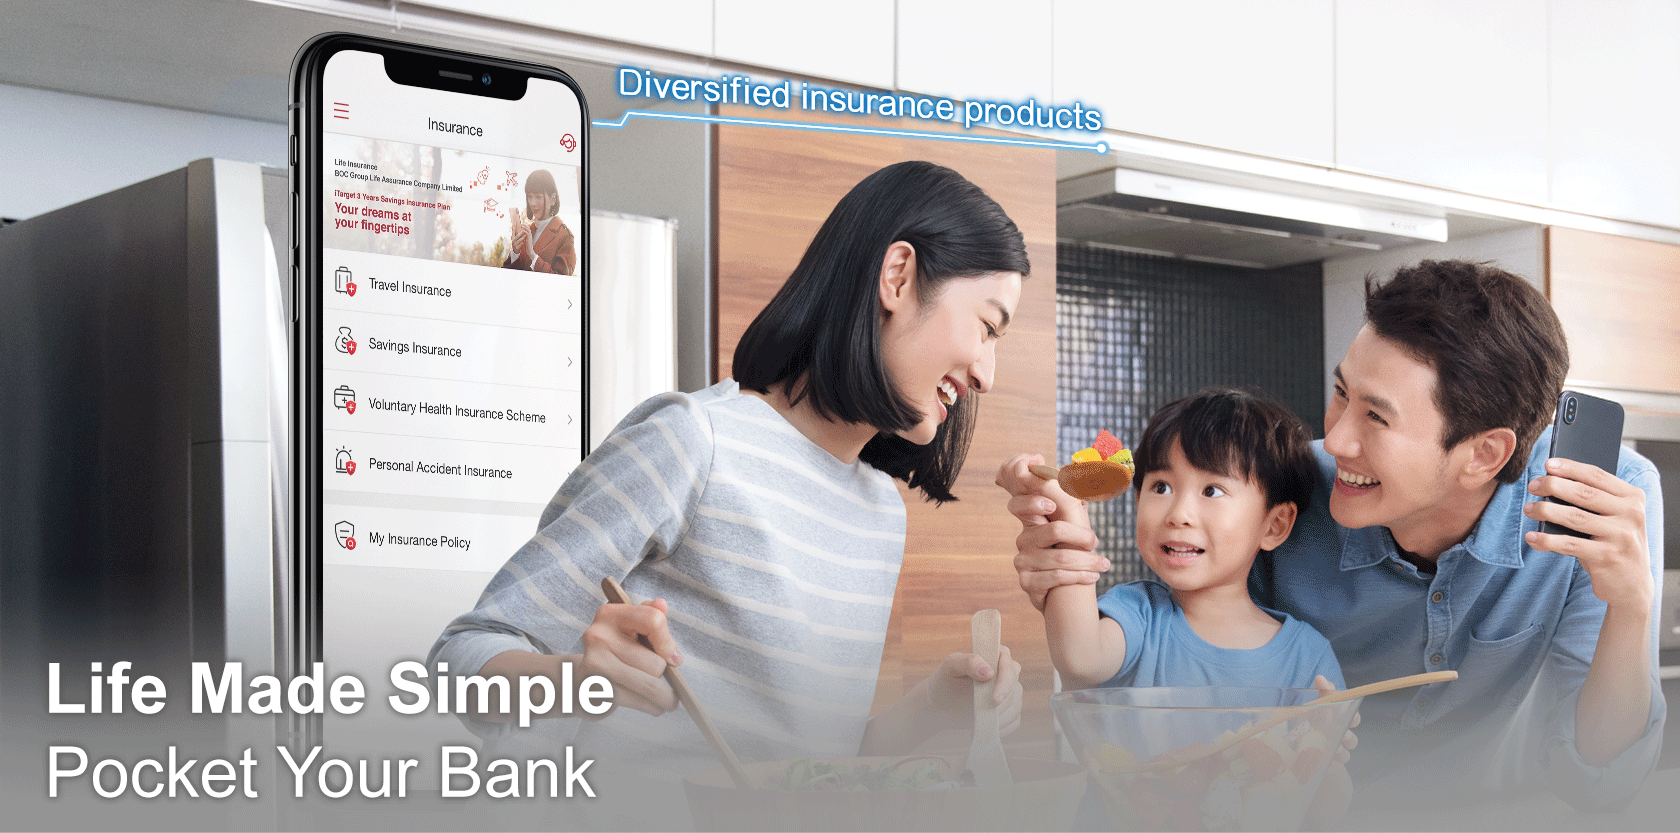 Life Made Simple Pocket Your Bank
Multiple comprehensive protection plans with just one click